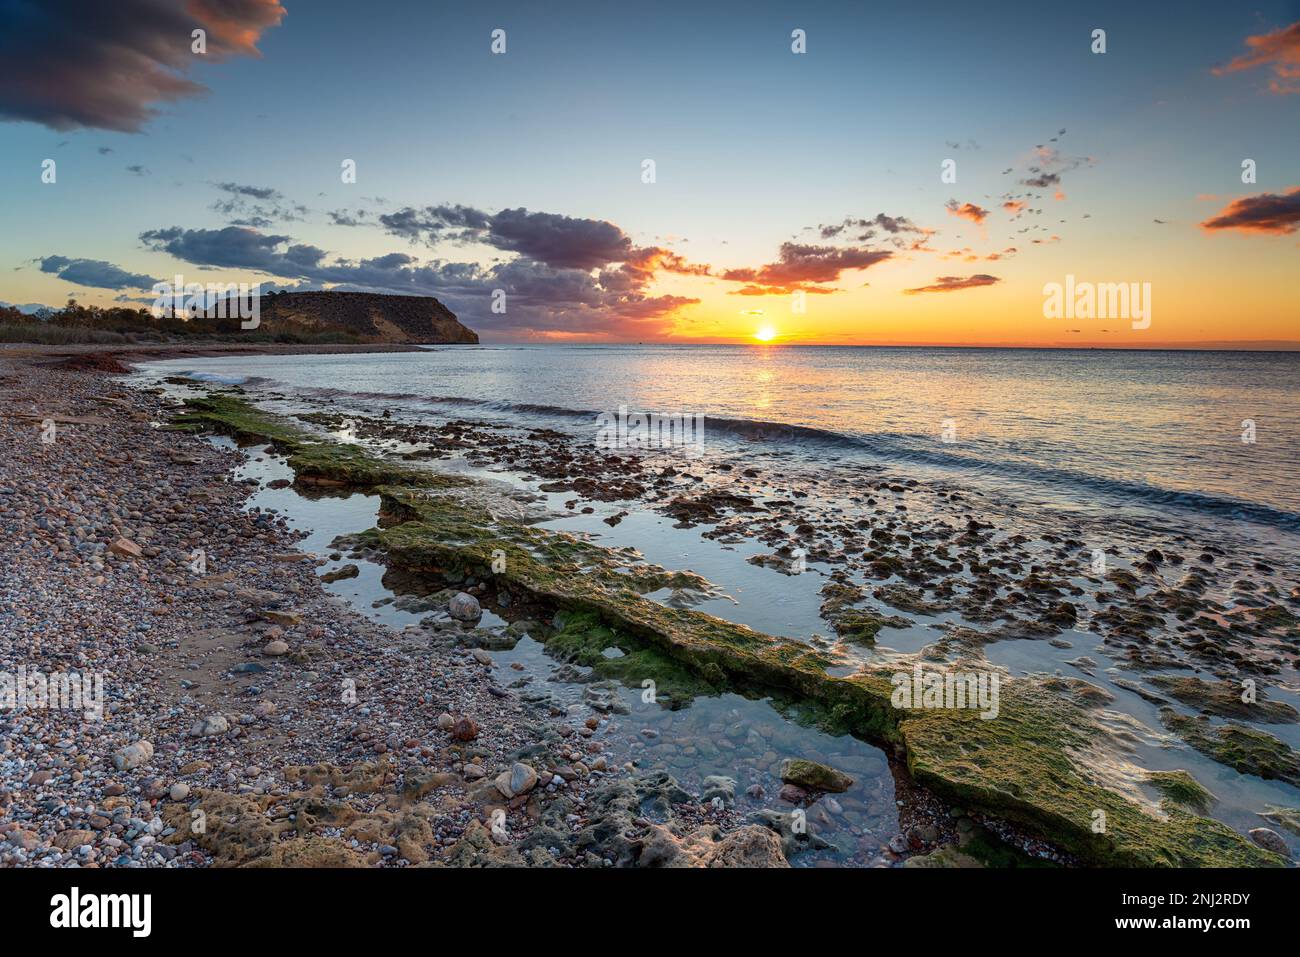 Beautiful sunrise over the Mediterranean sea at Playa las Palmeras at Aguilas in the Murcia region of Spain Stock Photo